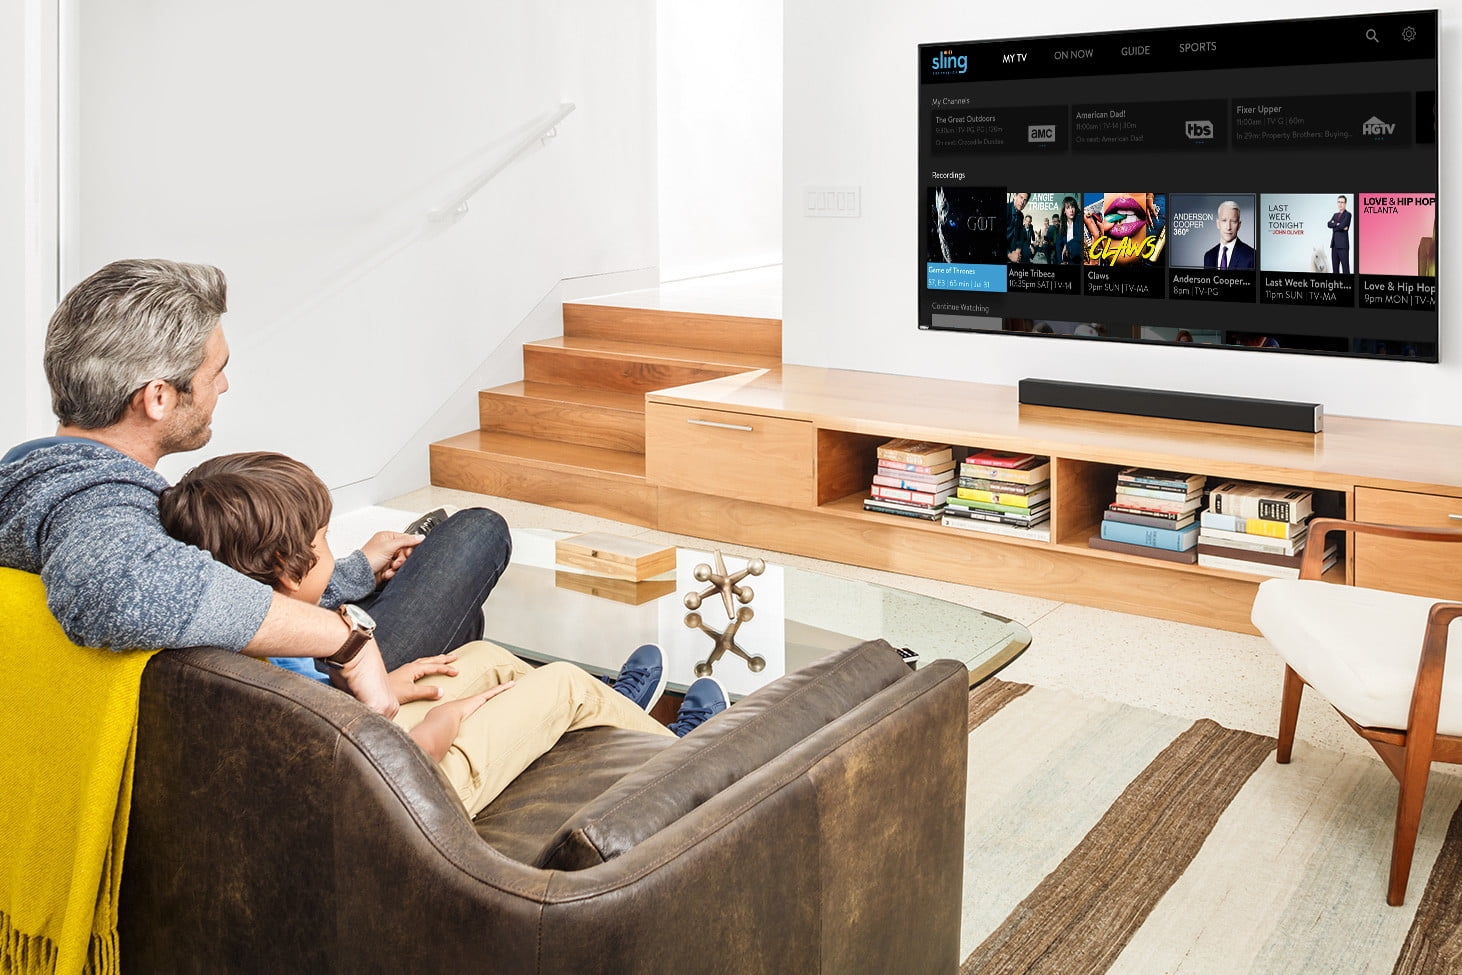 Best Ways To Get A Sling TV for FREE - Photo Digital Trends.